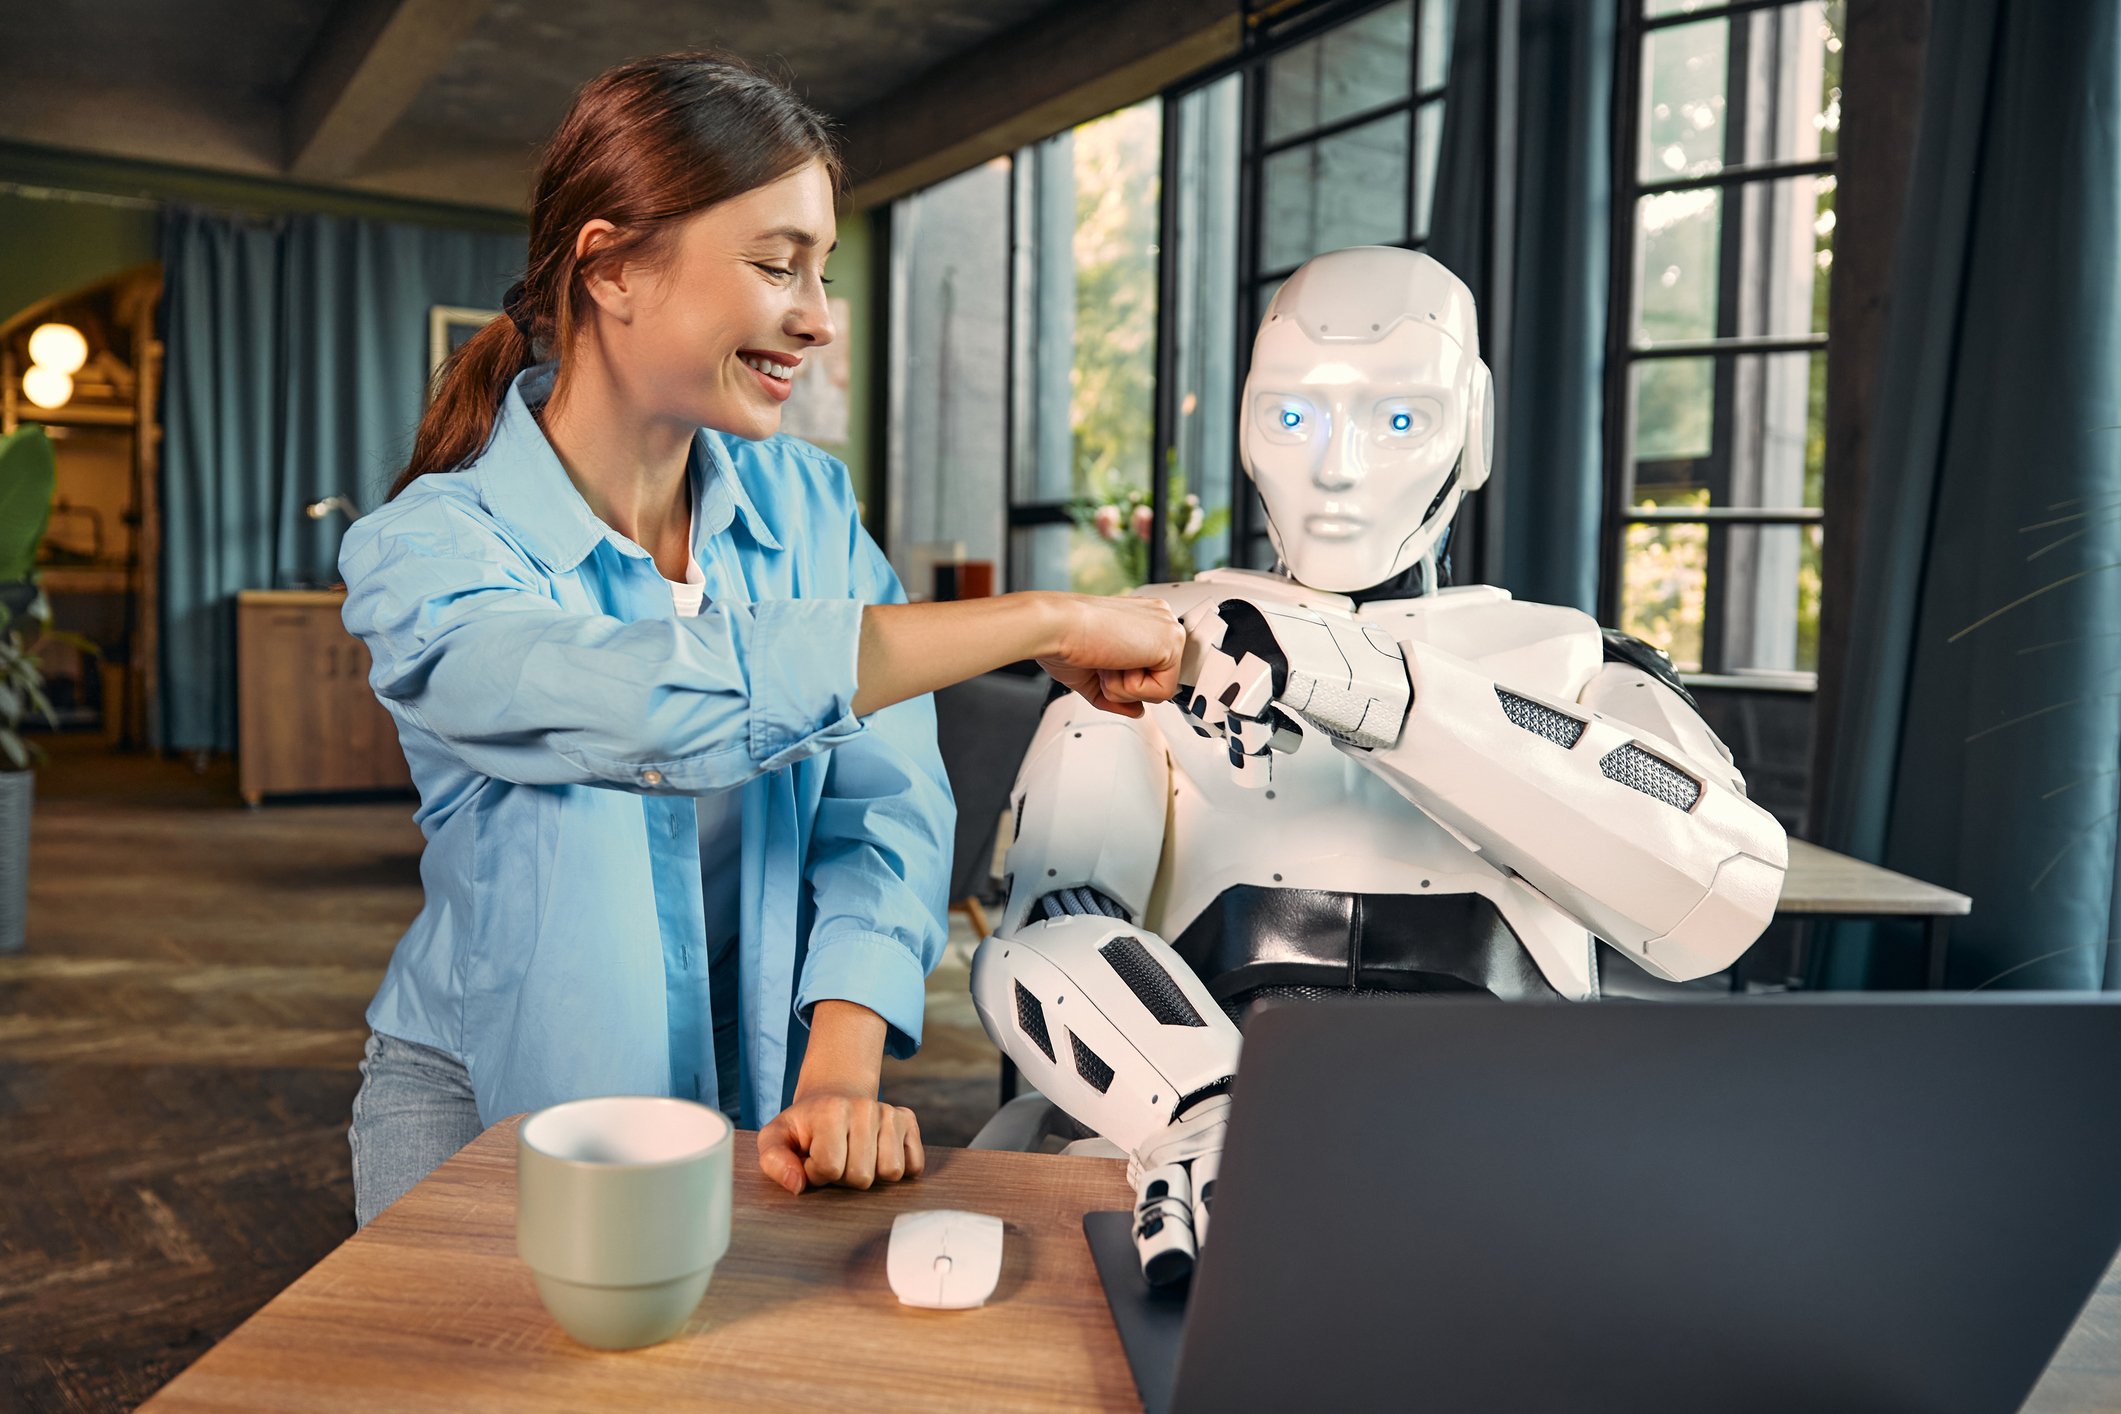 Robot and human working together